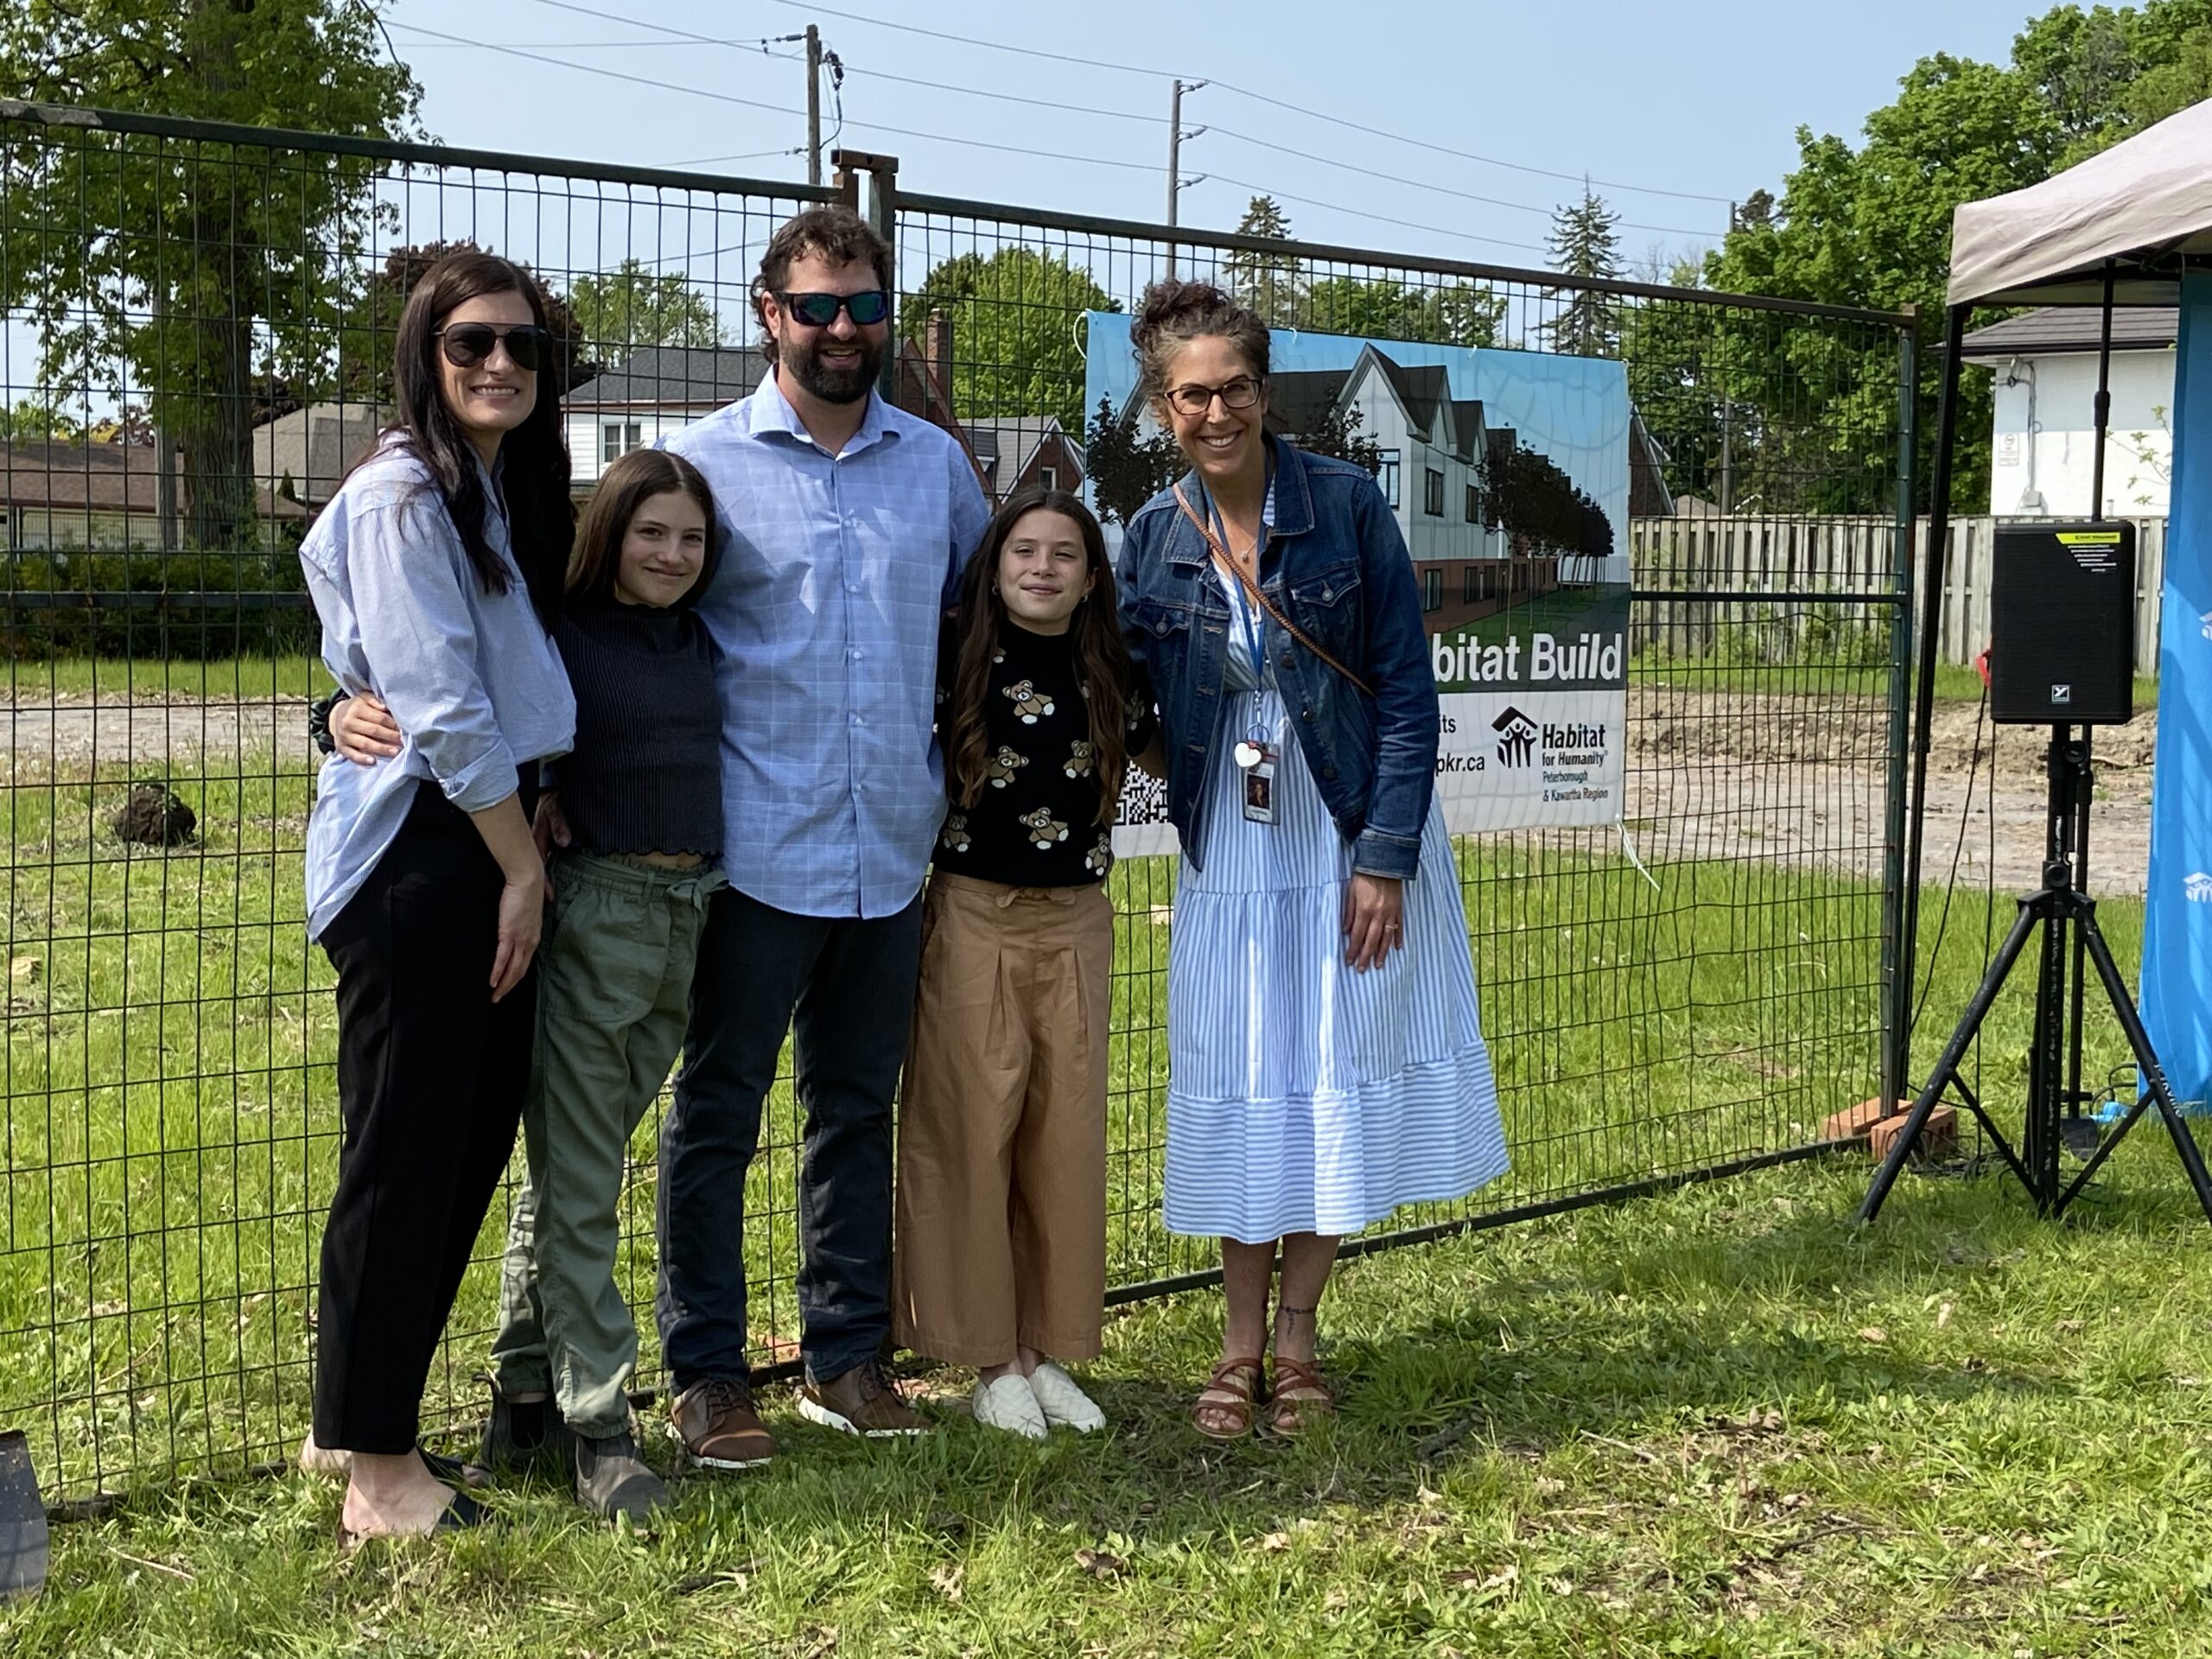 Ellyot, her family, and her teacher posing for a photo in front of the Phase 2 build site at the Build Kick-Off event on May 23